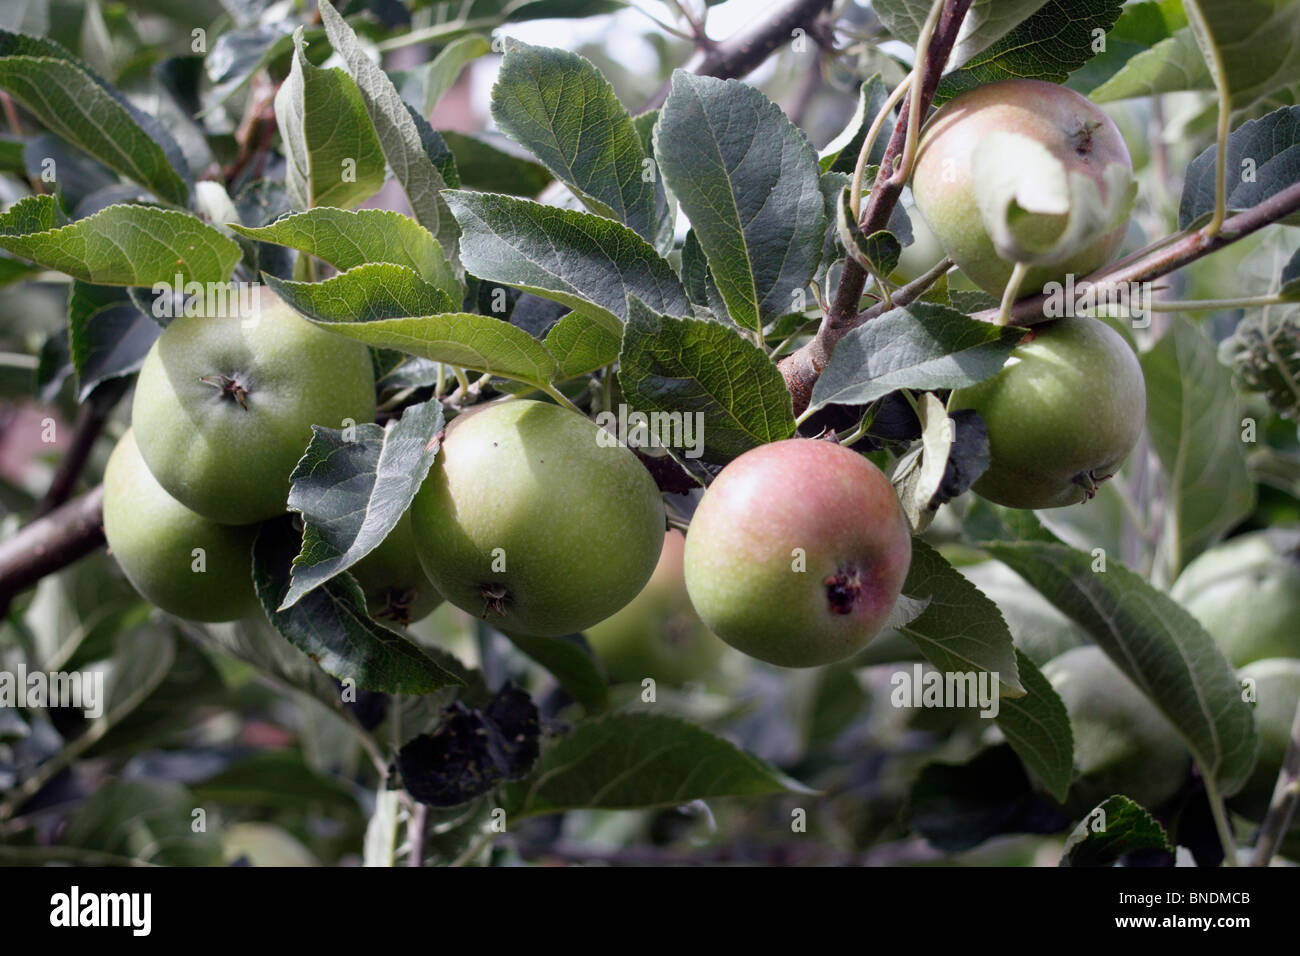 apples, Malus domestica, in the family Rosaceae Stock Photo